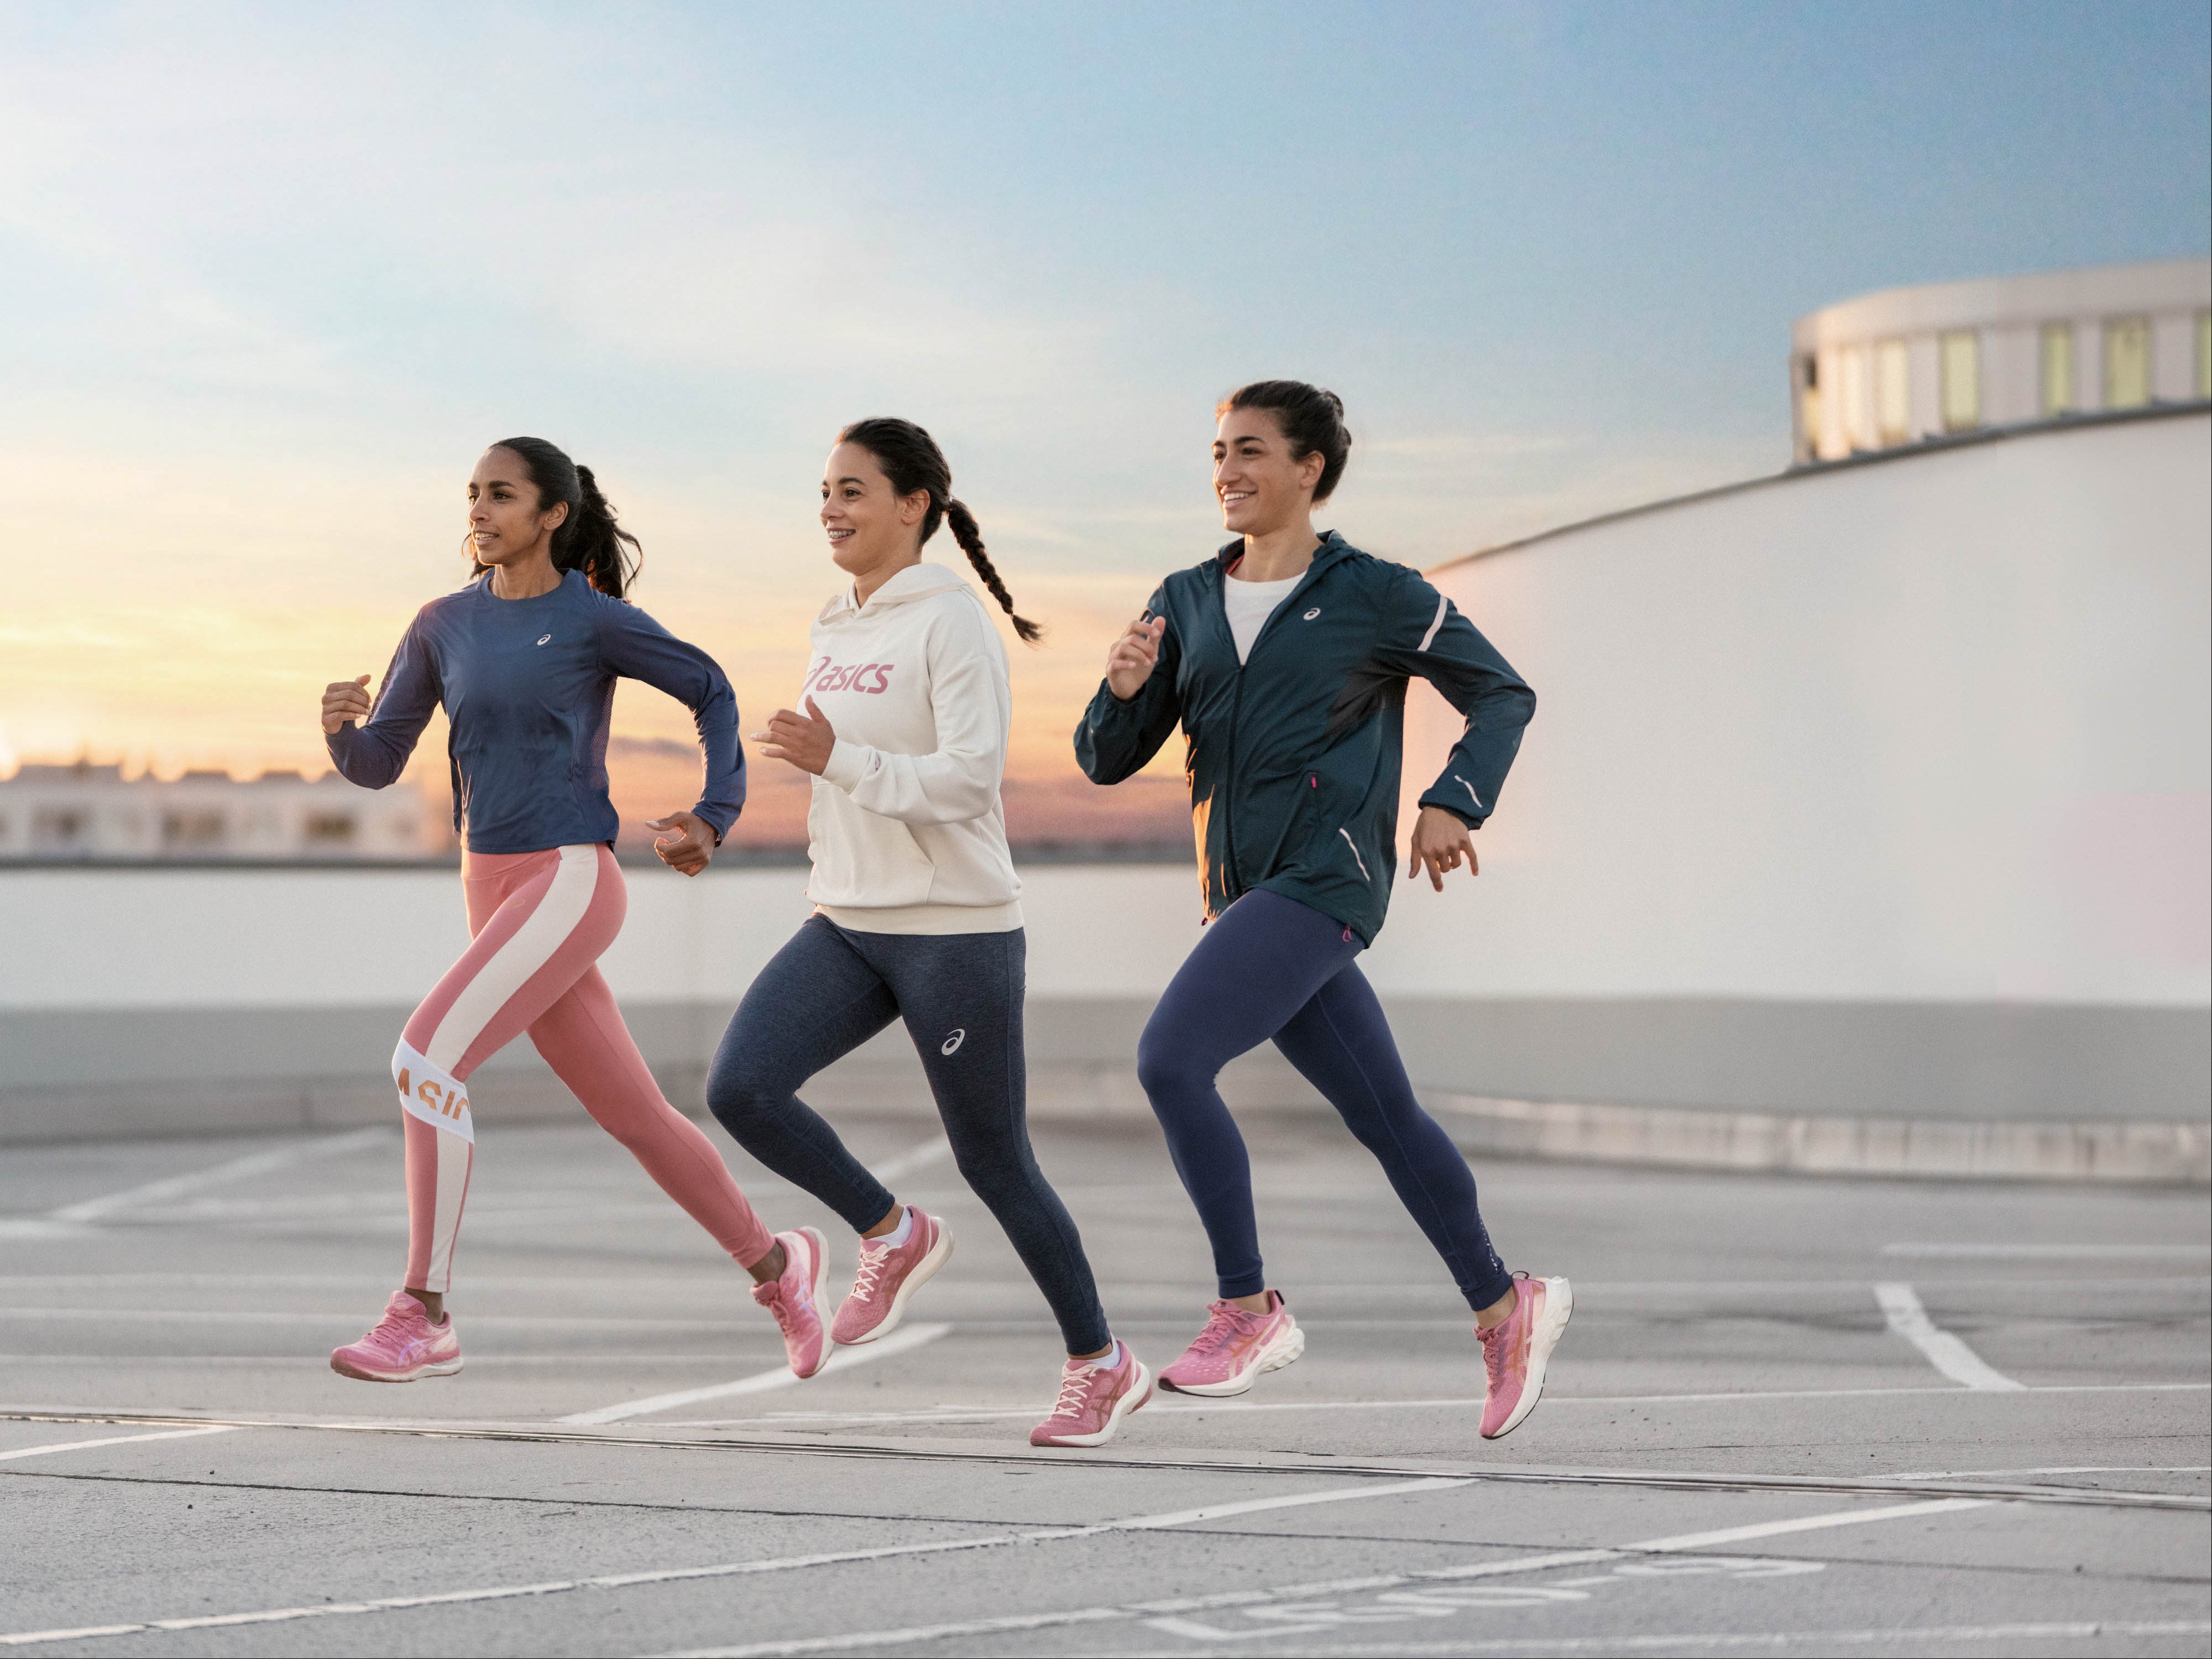 Nike's Transitional Activewear Brings New Aesthetic to Women's Athletics